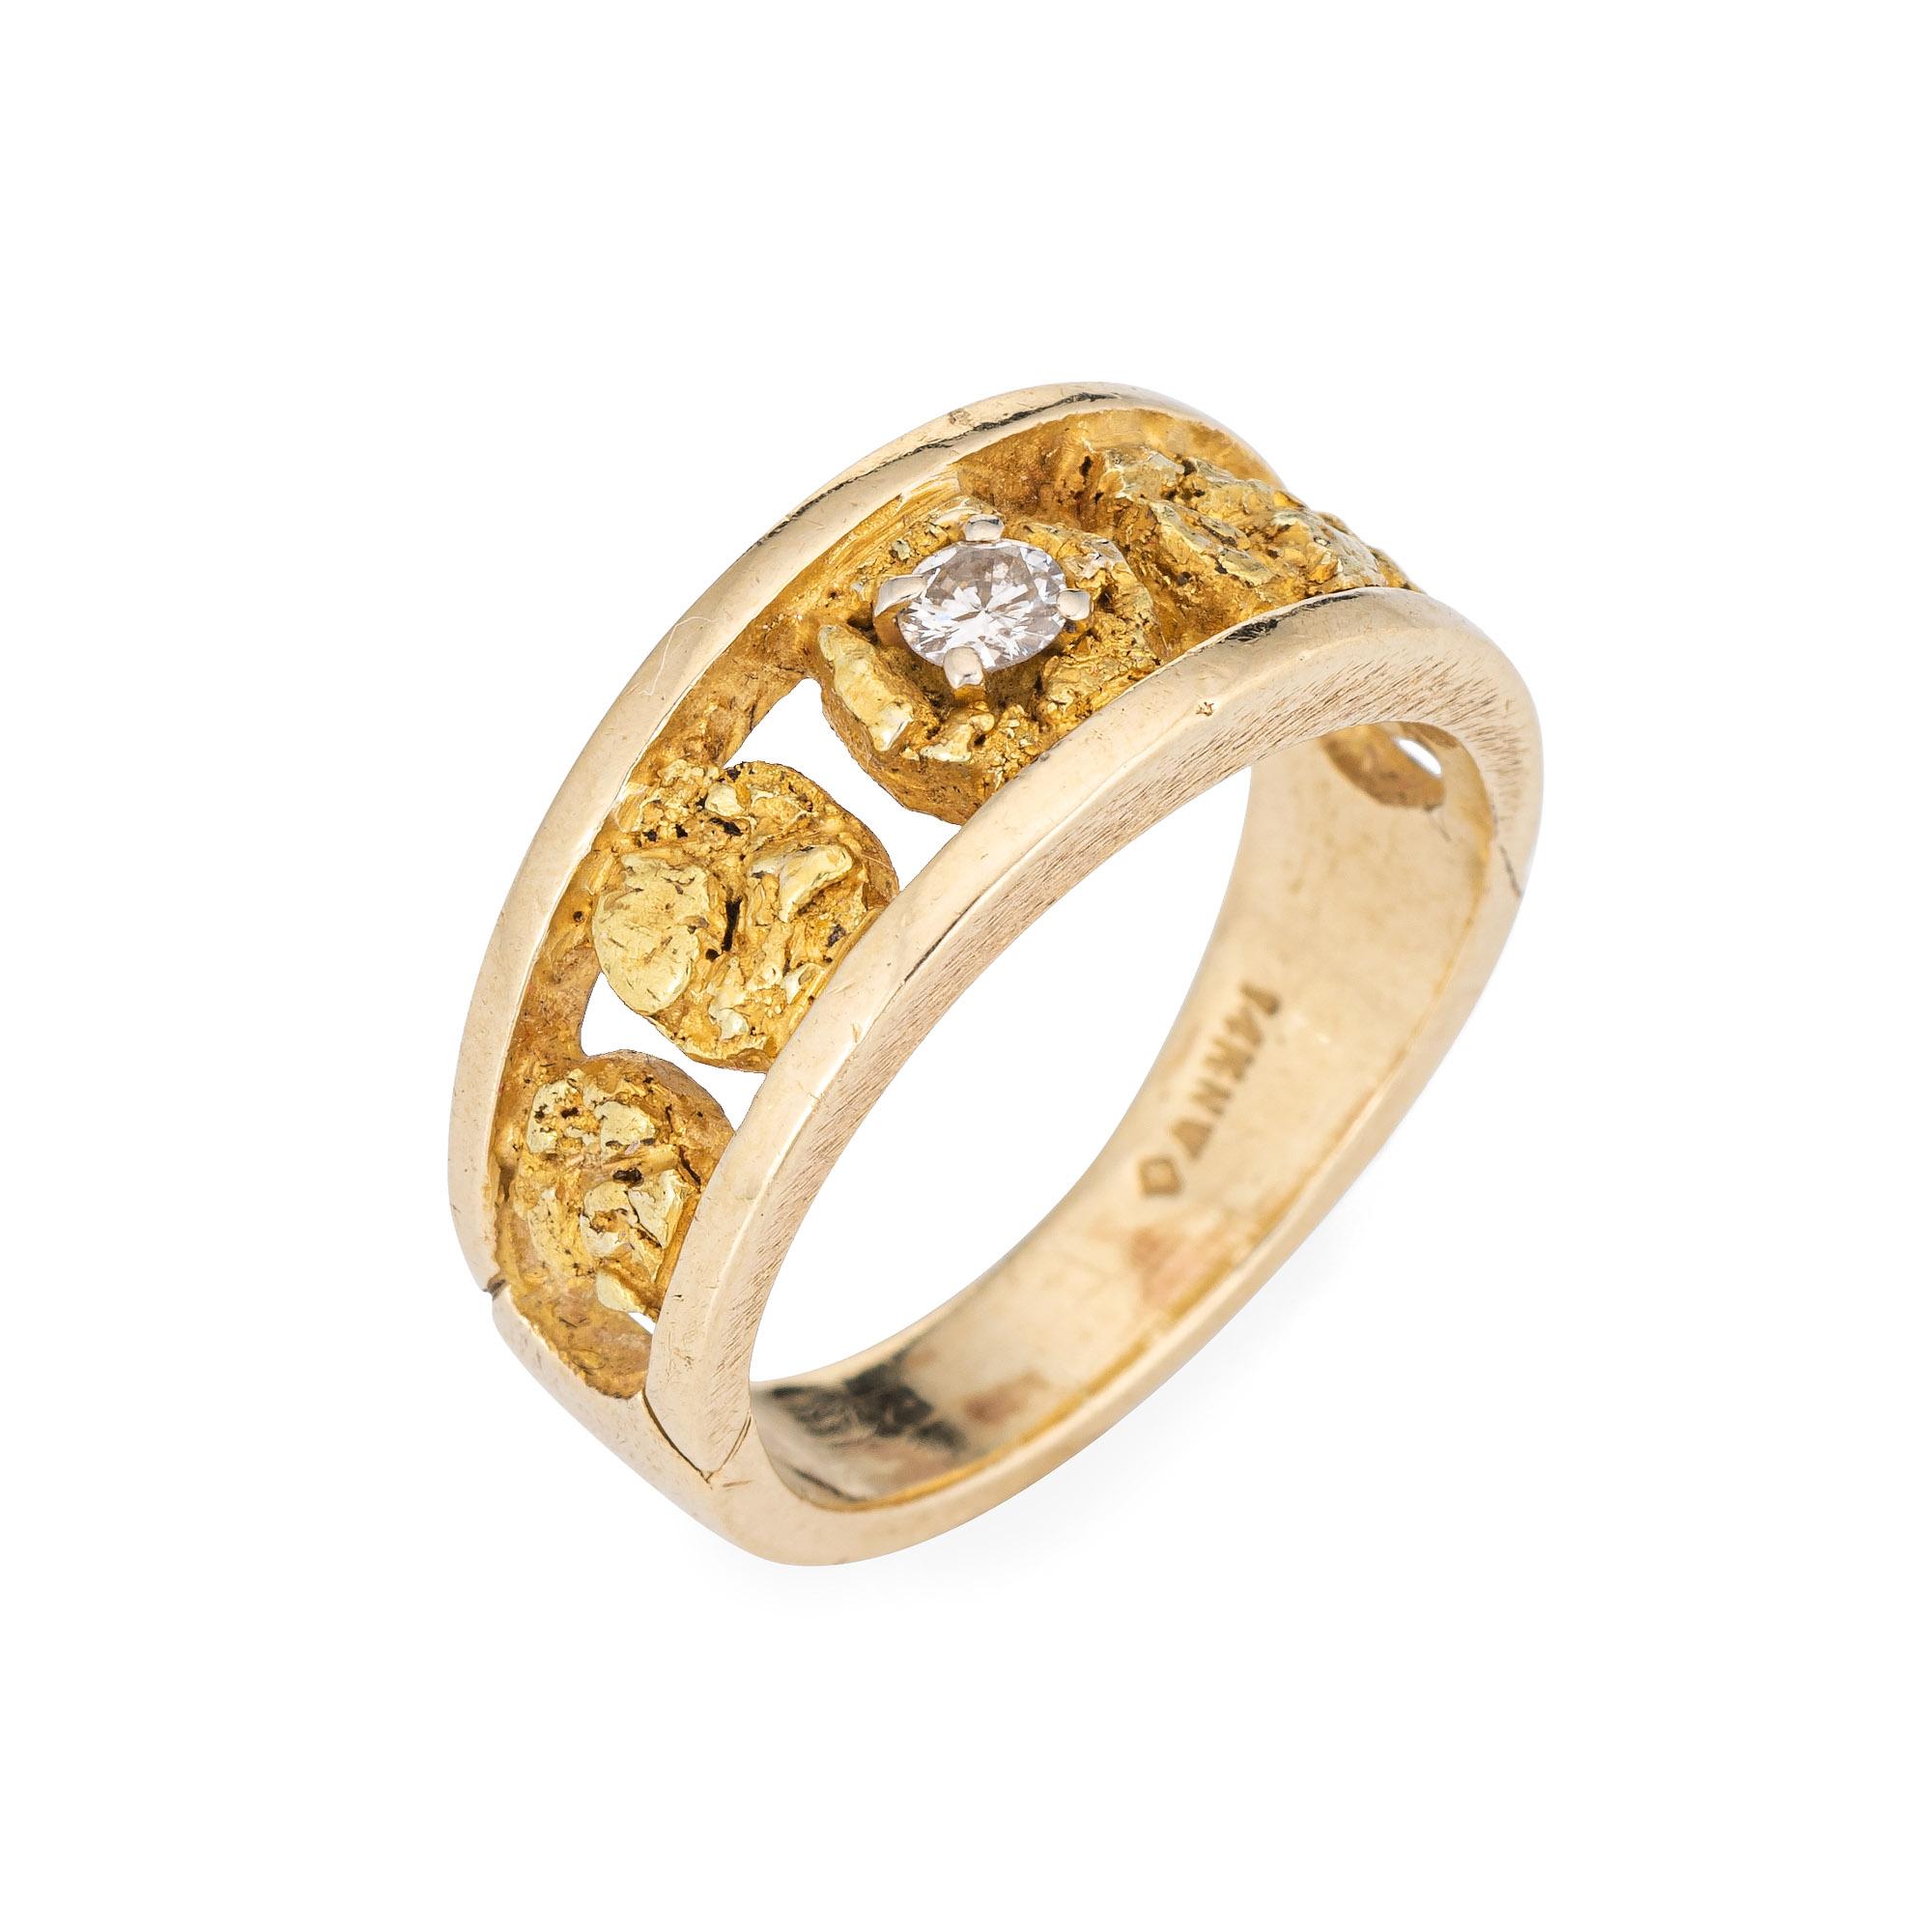 Stylish vintage nugget & diamond ring (circa 1970s) crafted in 14 karat yellow gold (the gold nuggets are 24k gold). 

One estimated 0.10 carat round brilliant cut diamond is set into the center nugget (estimated at J-K color and I1 clarity). 

The